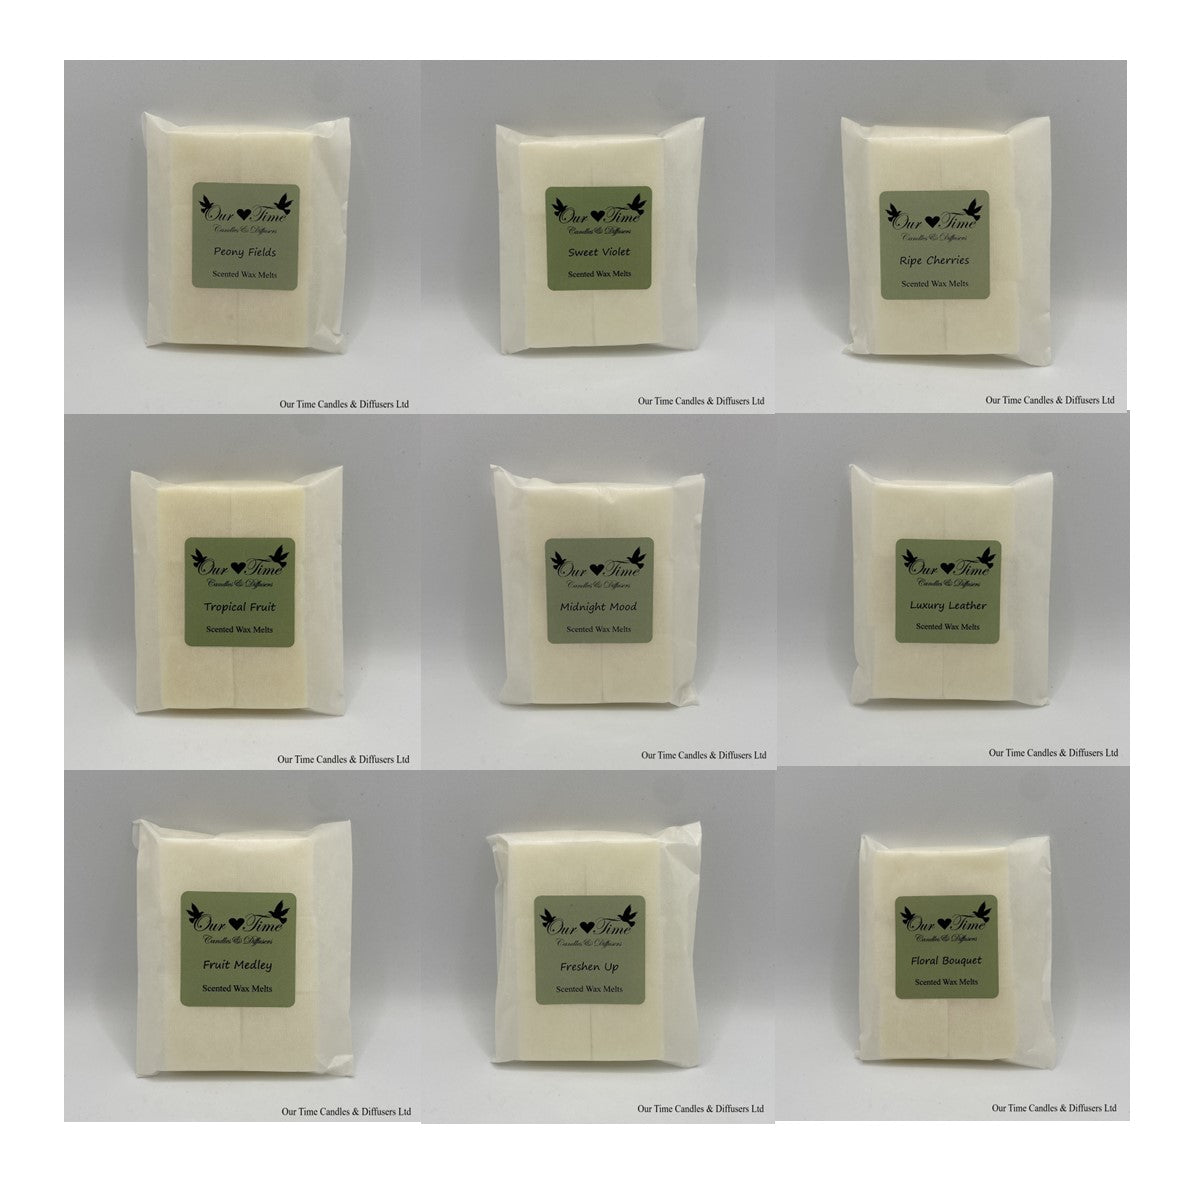 Our Wax Melts in their new bio-degradable, recyclable, packaging.